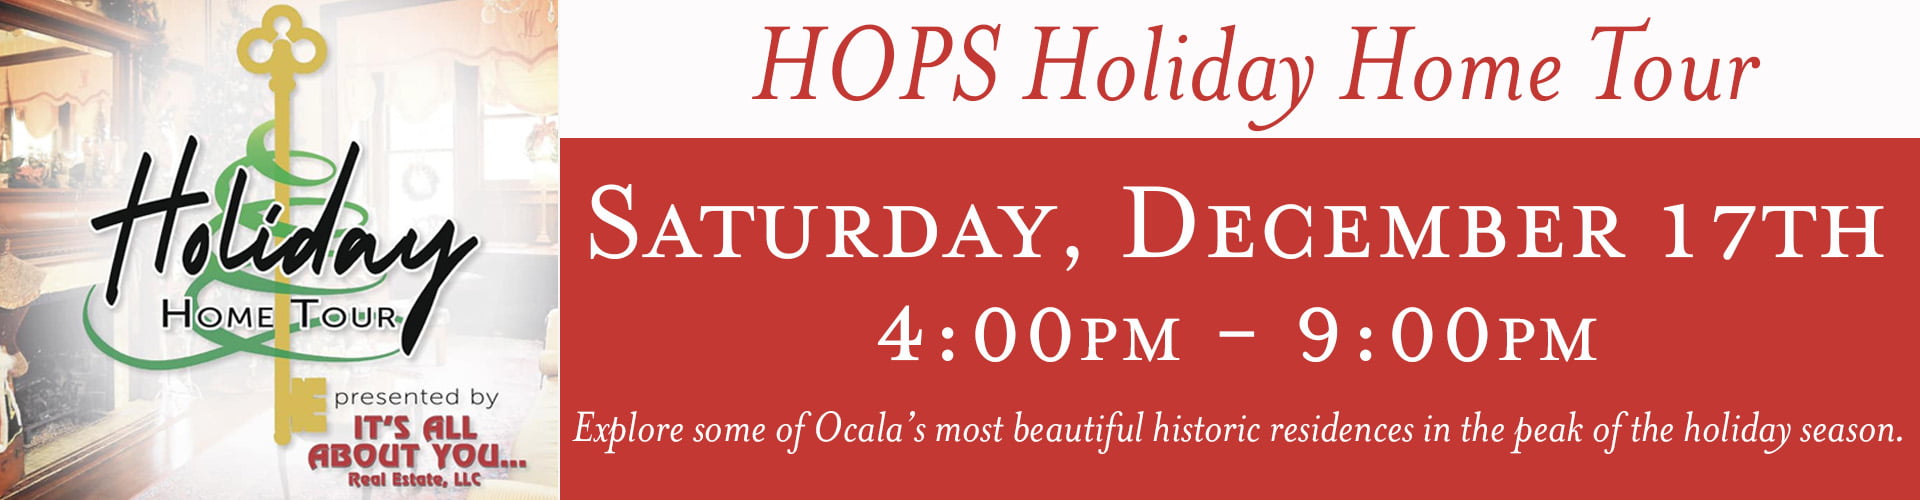 HOPS Holiday Tour banner